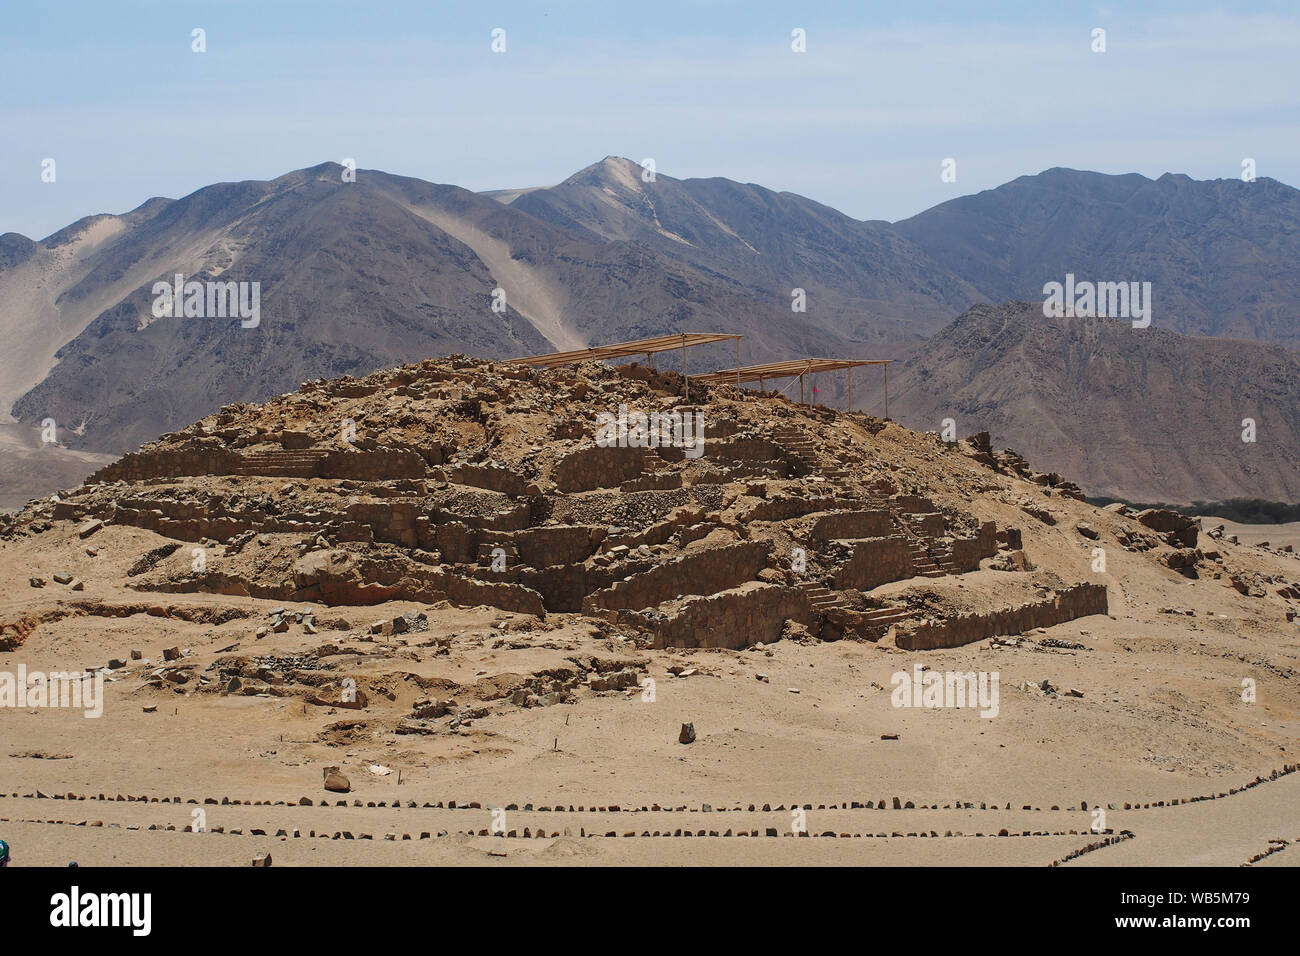 View of a pyramid  of the ancient sacred citadel of Caral. The sacred city of Caral is considered as the oldest civilization in America, its remains date from 3,500 BC. Stock Photo